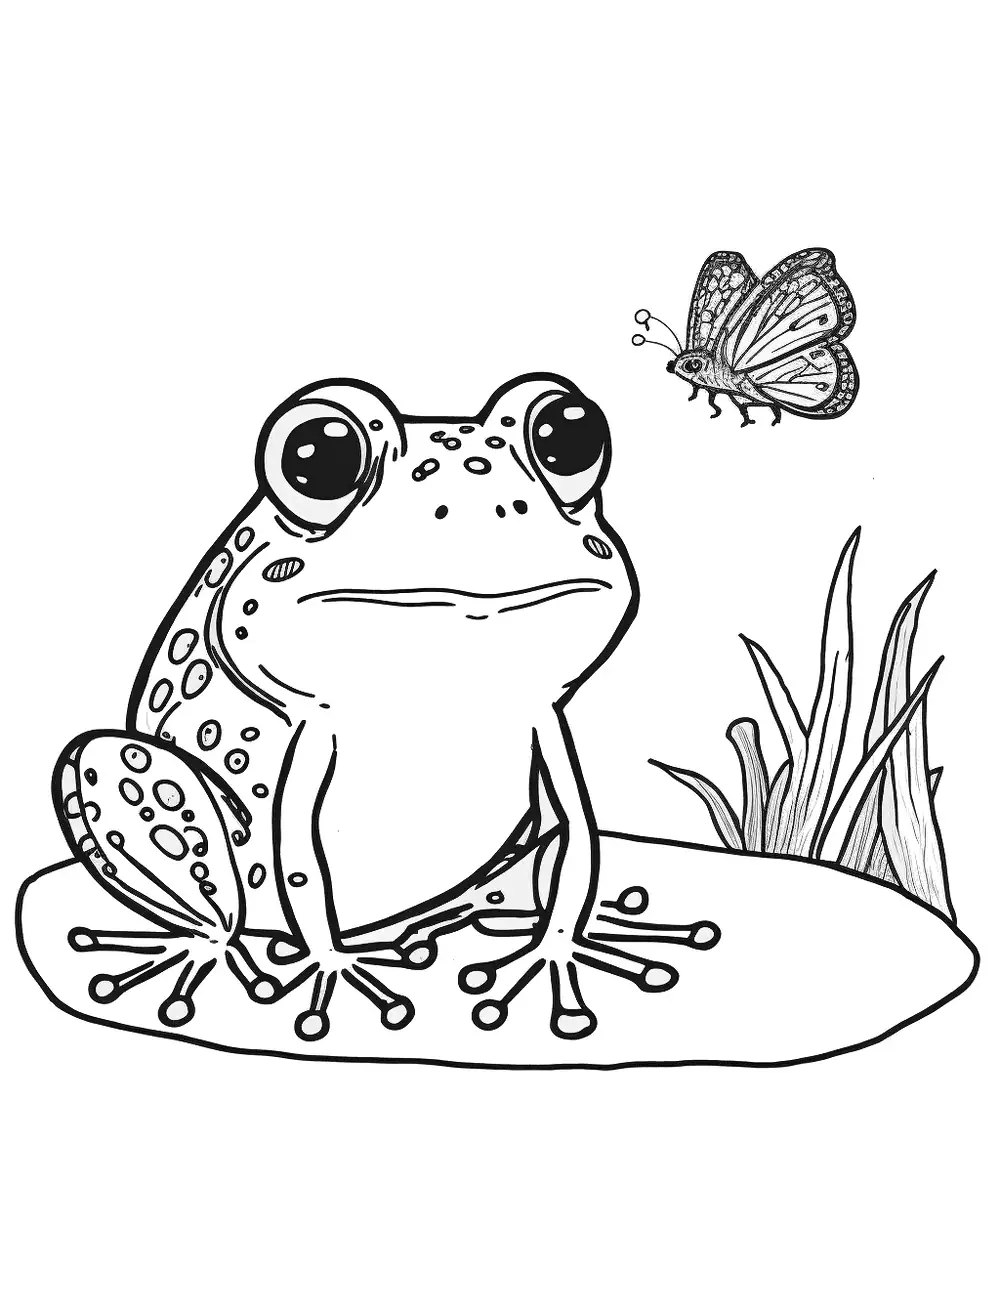 Frog And Butterfly Coloring Page - A frog and a butterfly, with the butterfly landing on the frog's nose